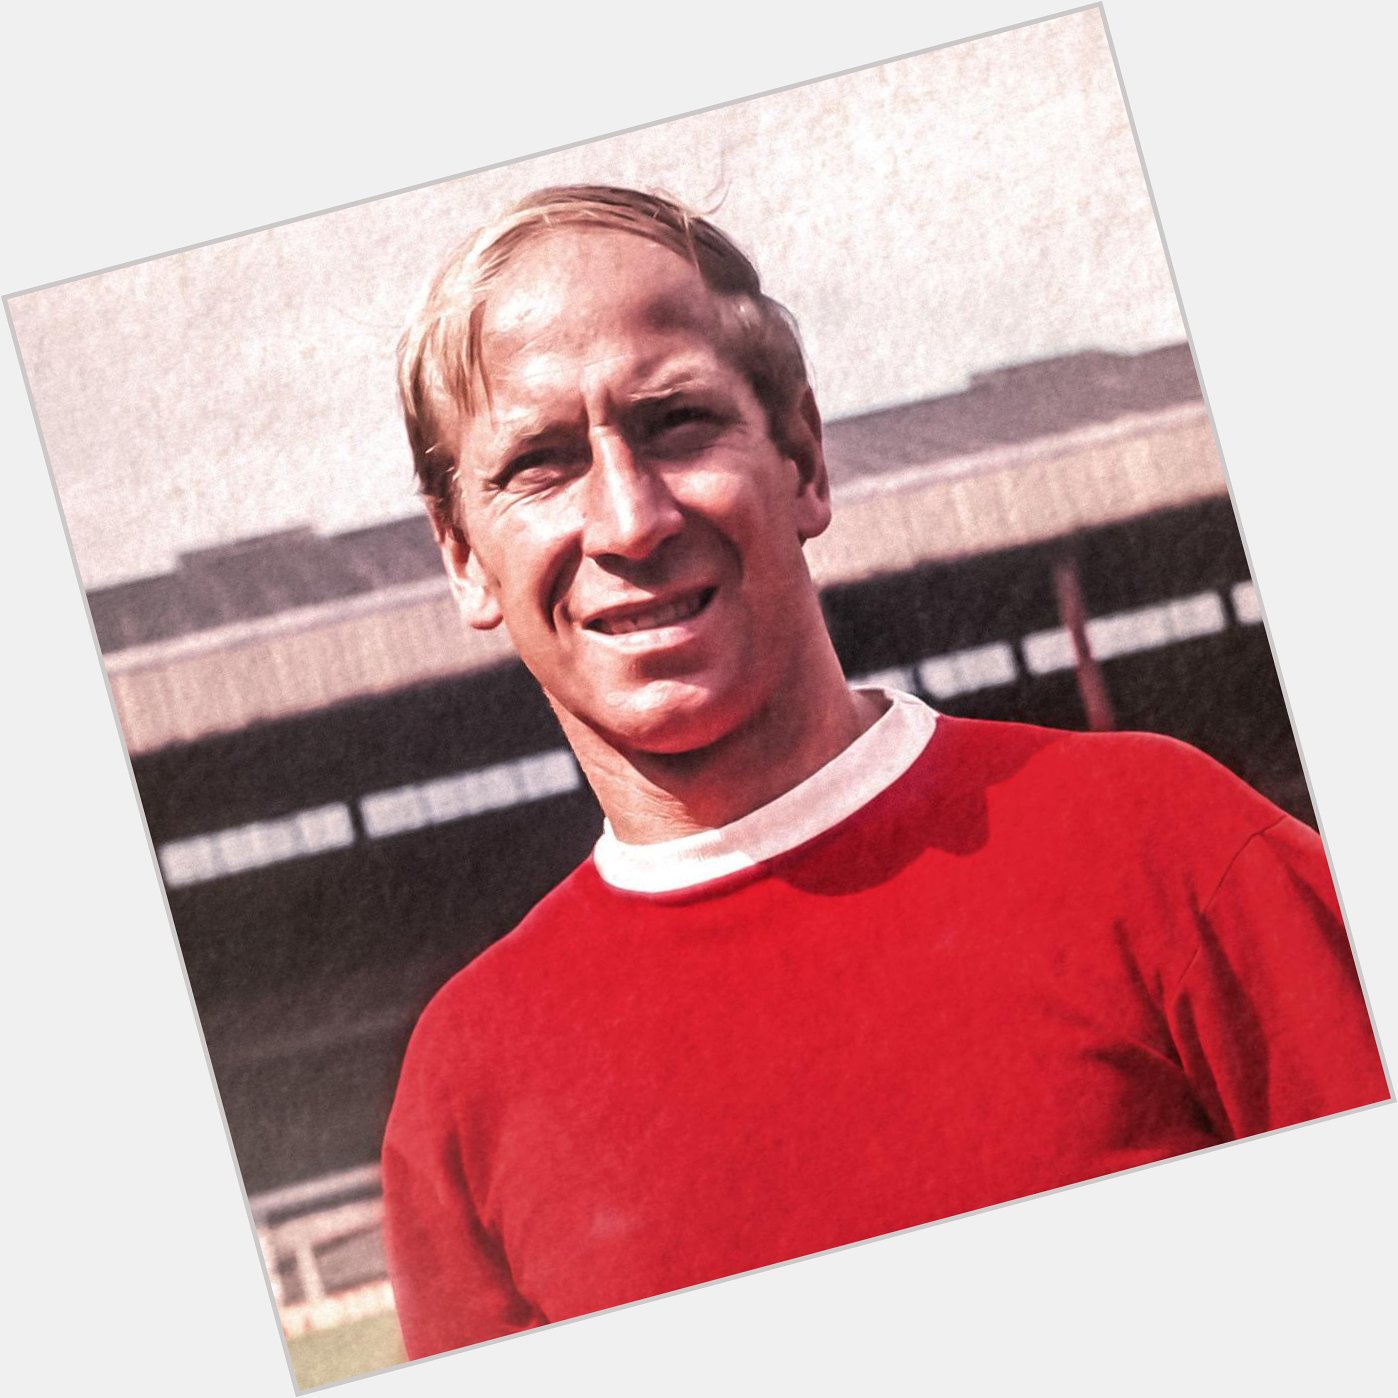 Happy birthday Sir Bobby Charlton   Absolute legend of the game 